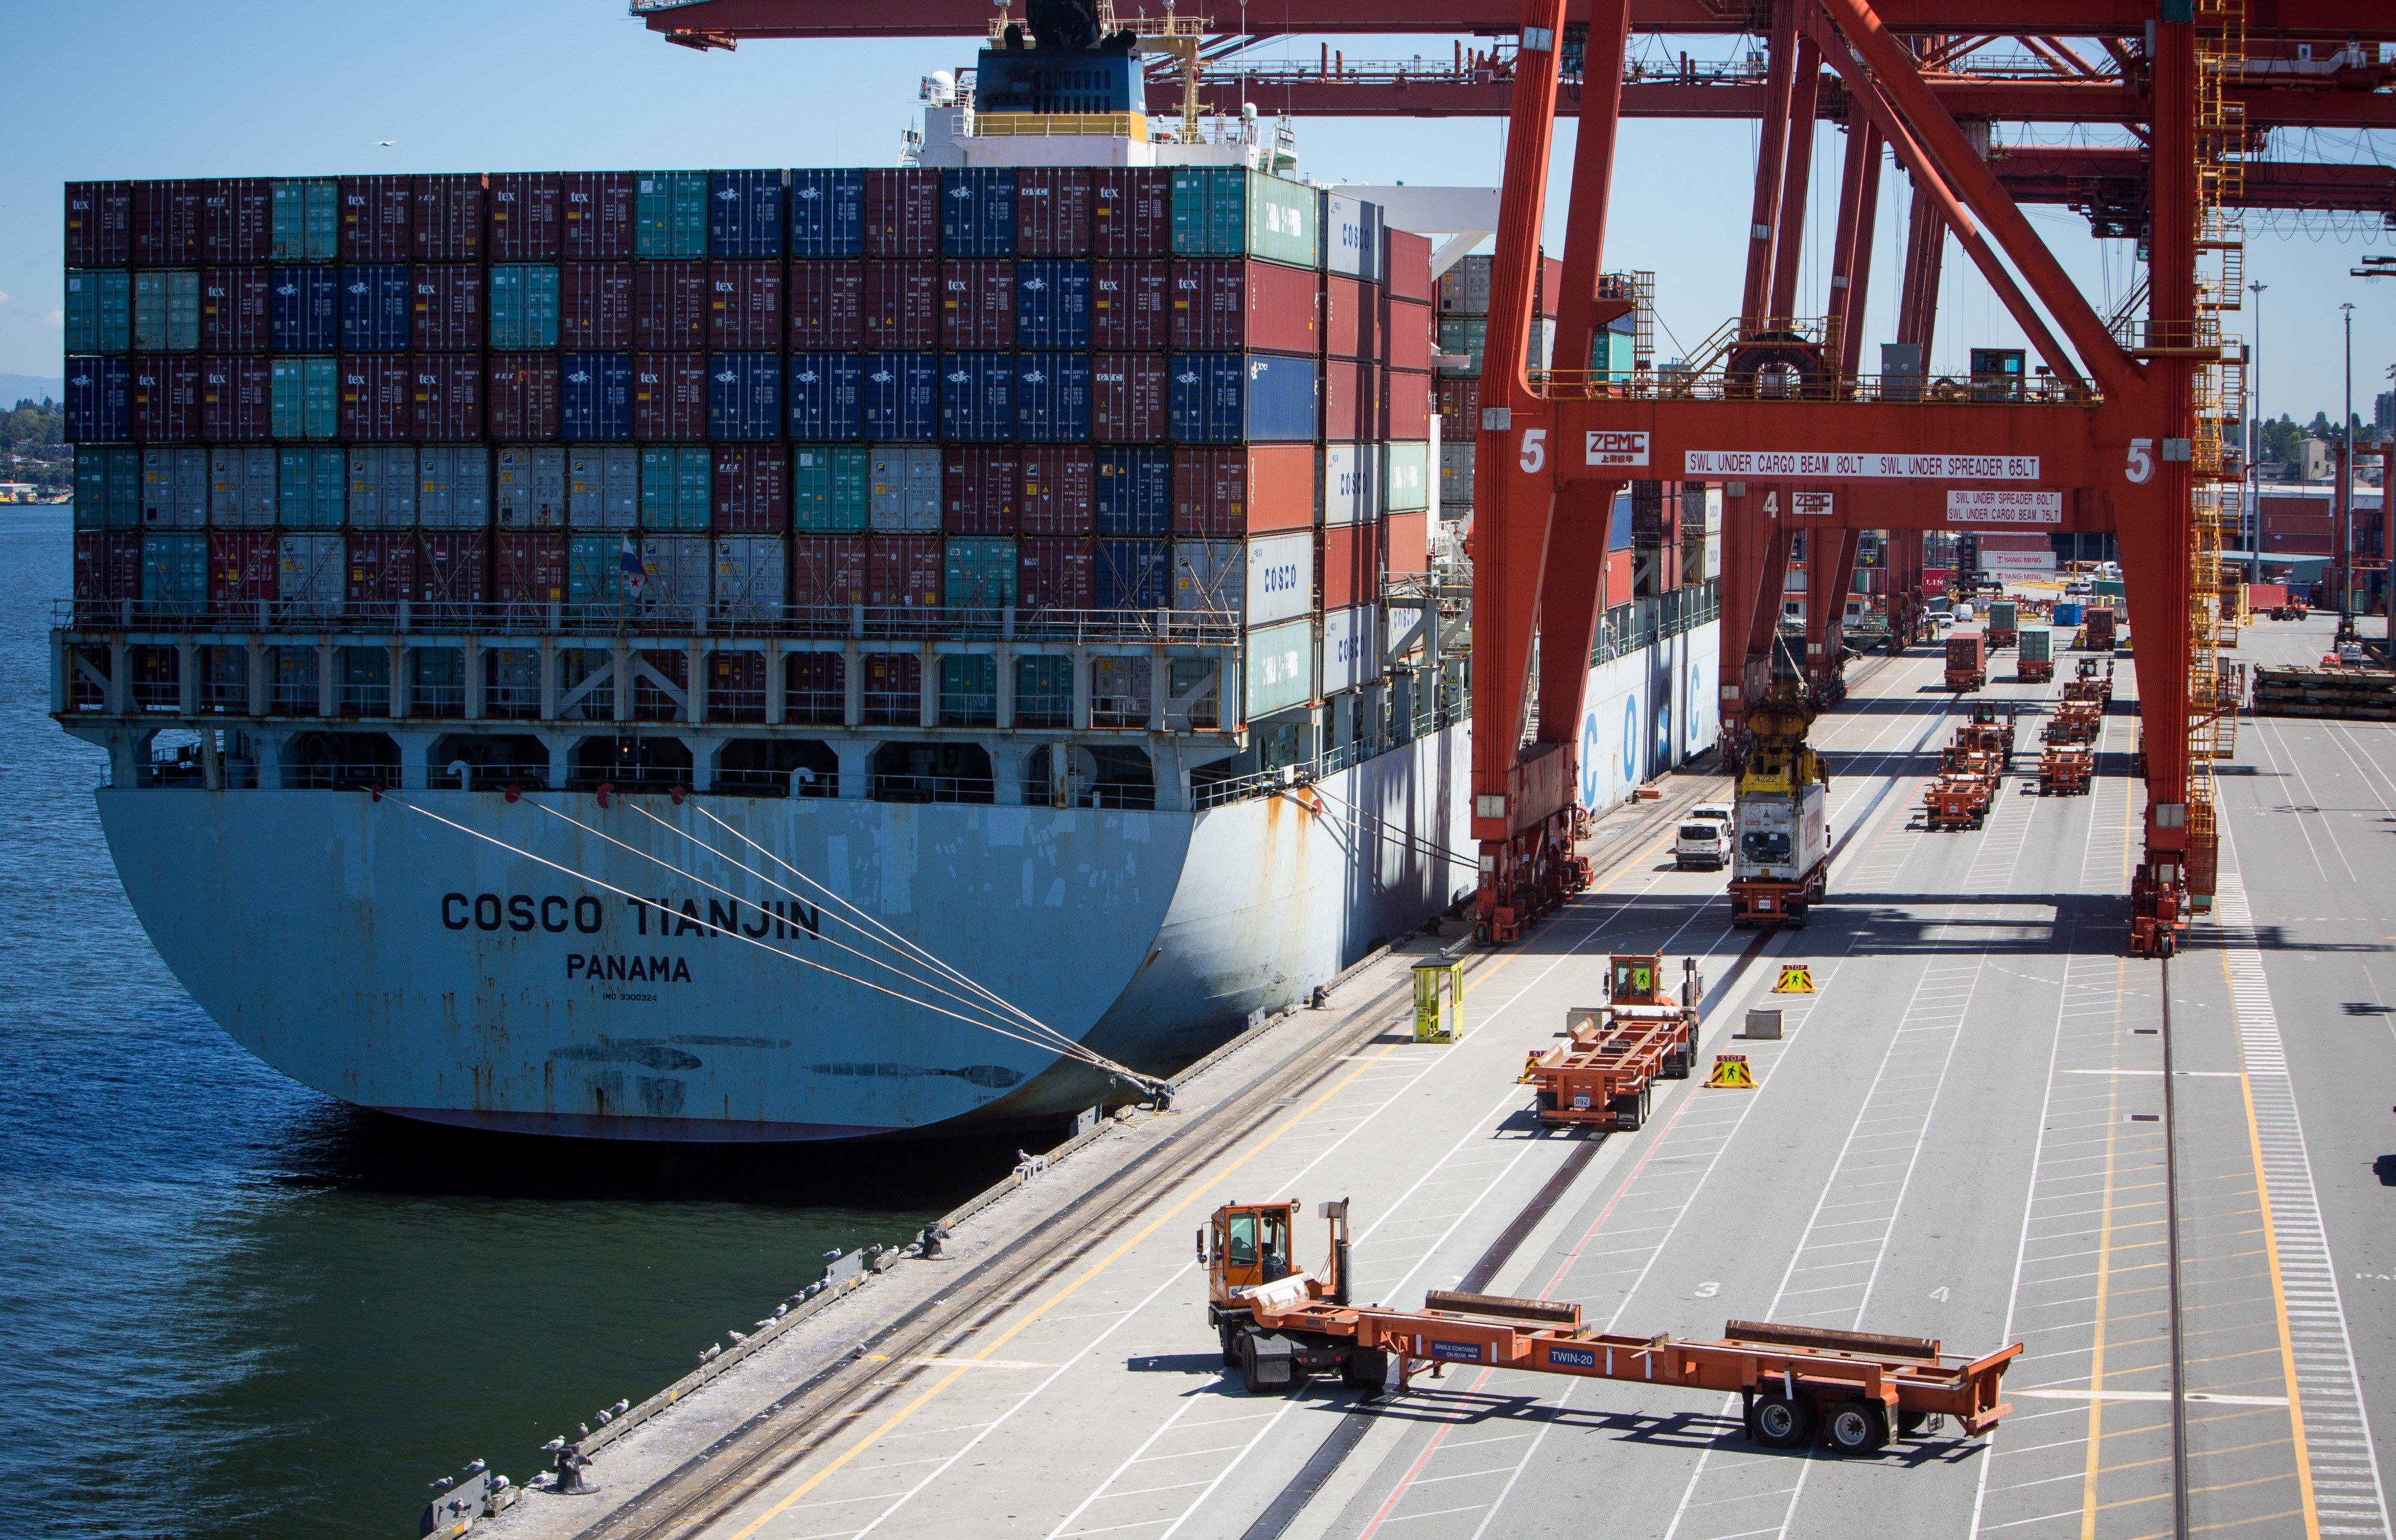 With new shareholder Fairfax, Seaspan said it is ready for growth from increasing China trades under belt and road plan, offsetting risks from US China trade war